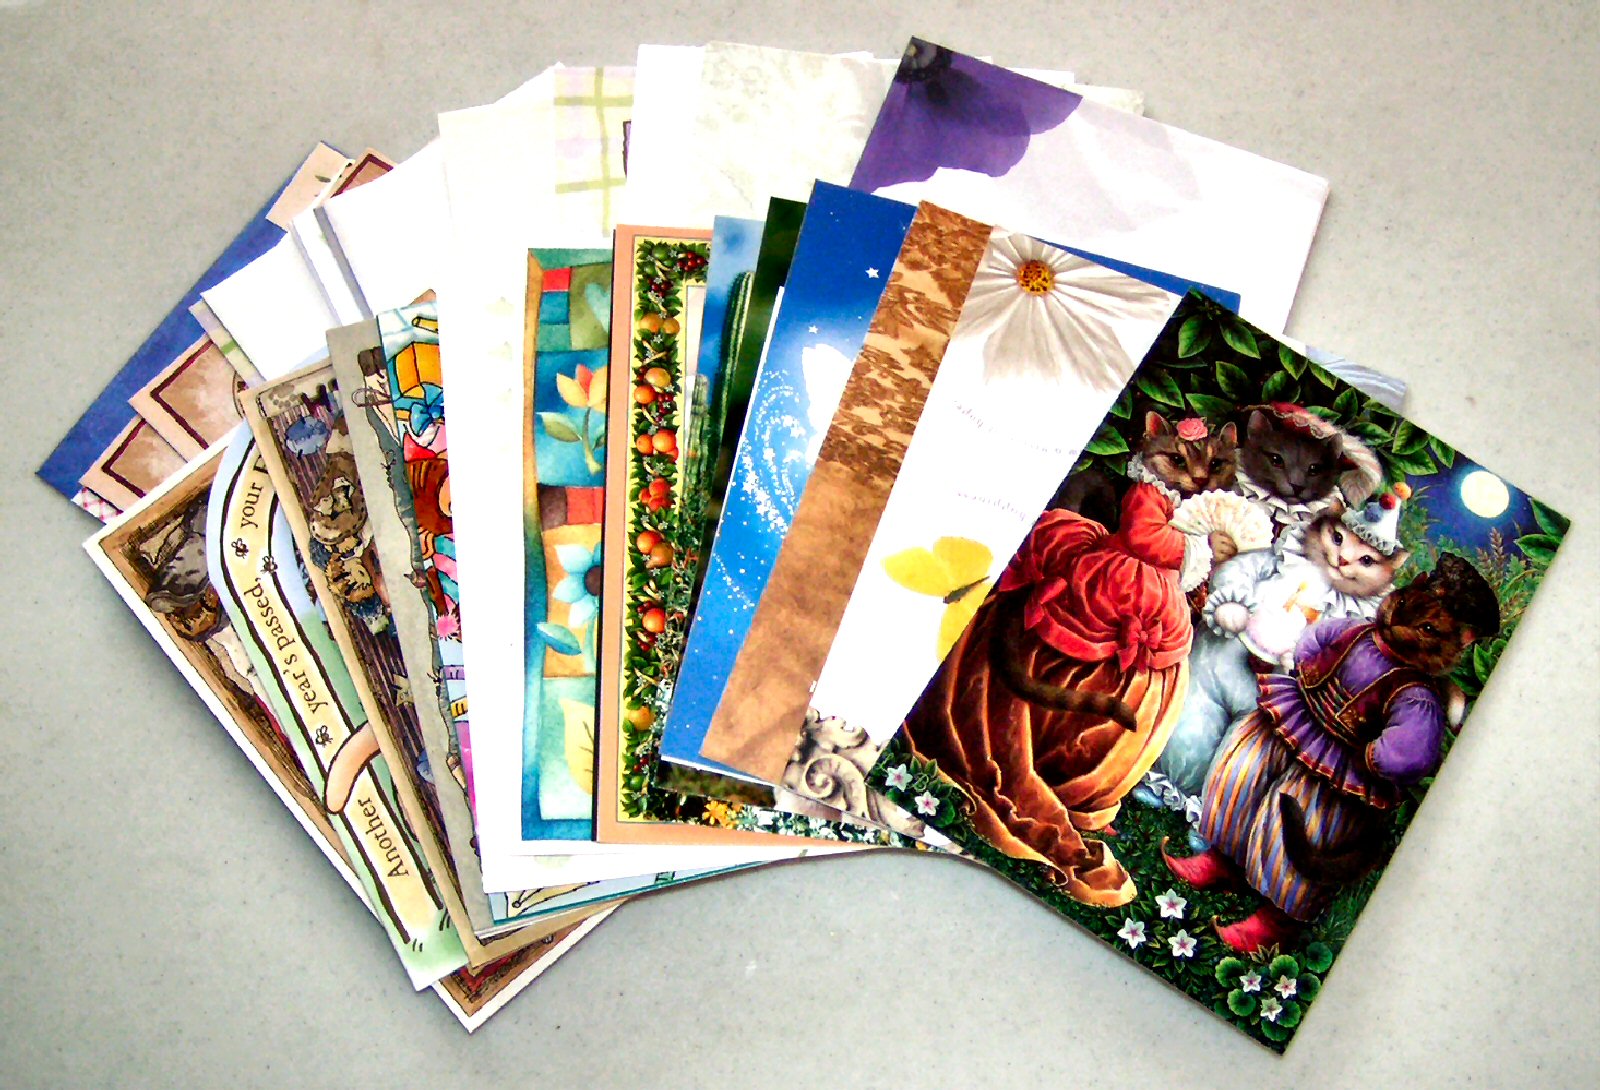 20-Count Assorted High-End Art All-Occasion Greeting Cards - Click Image to Close